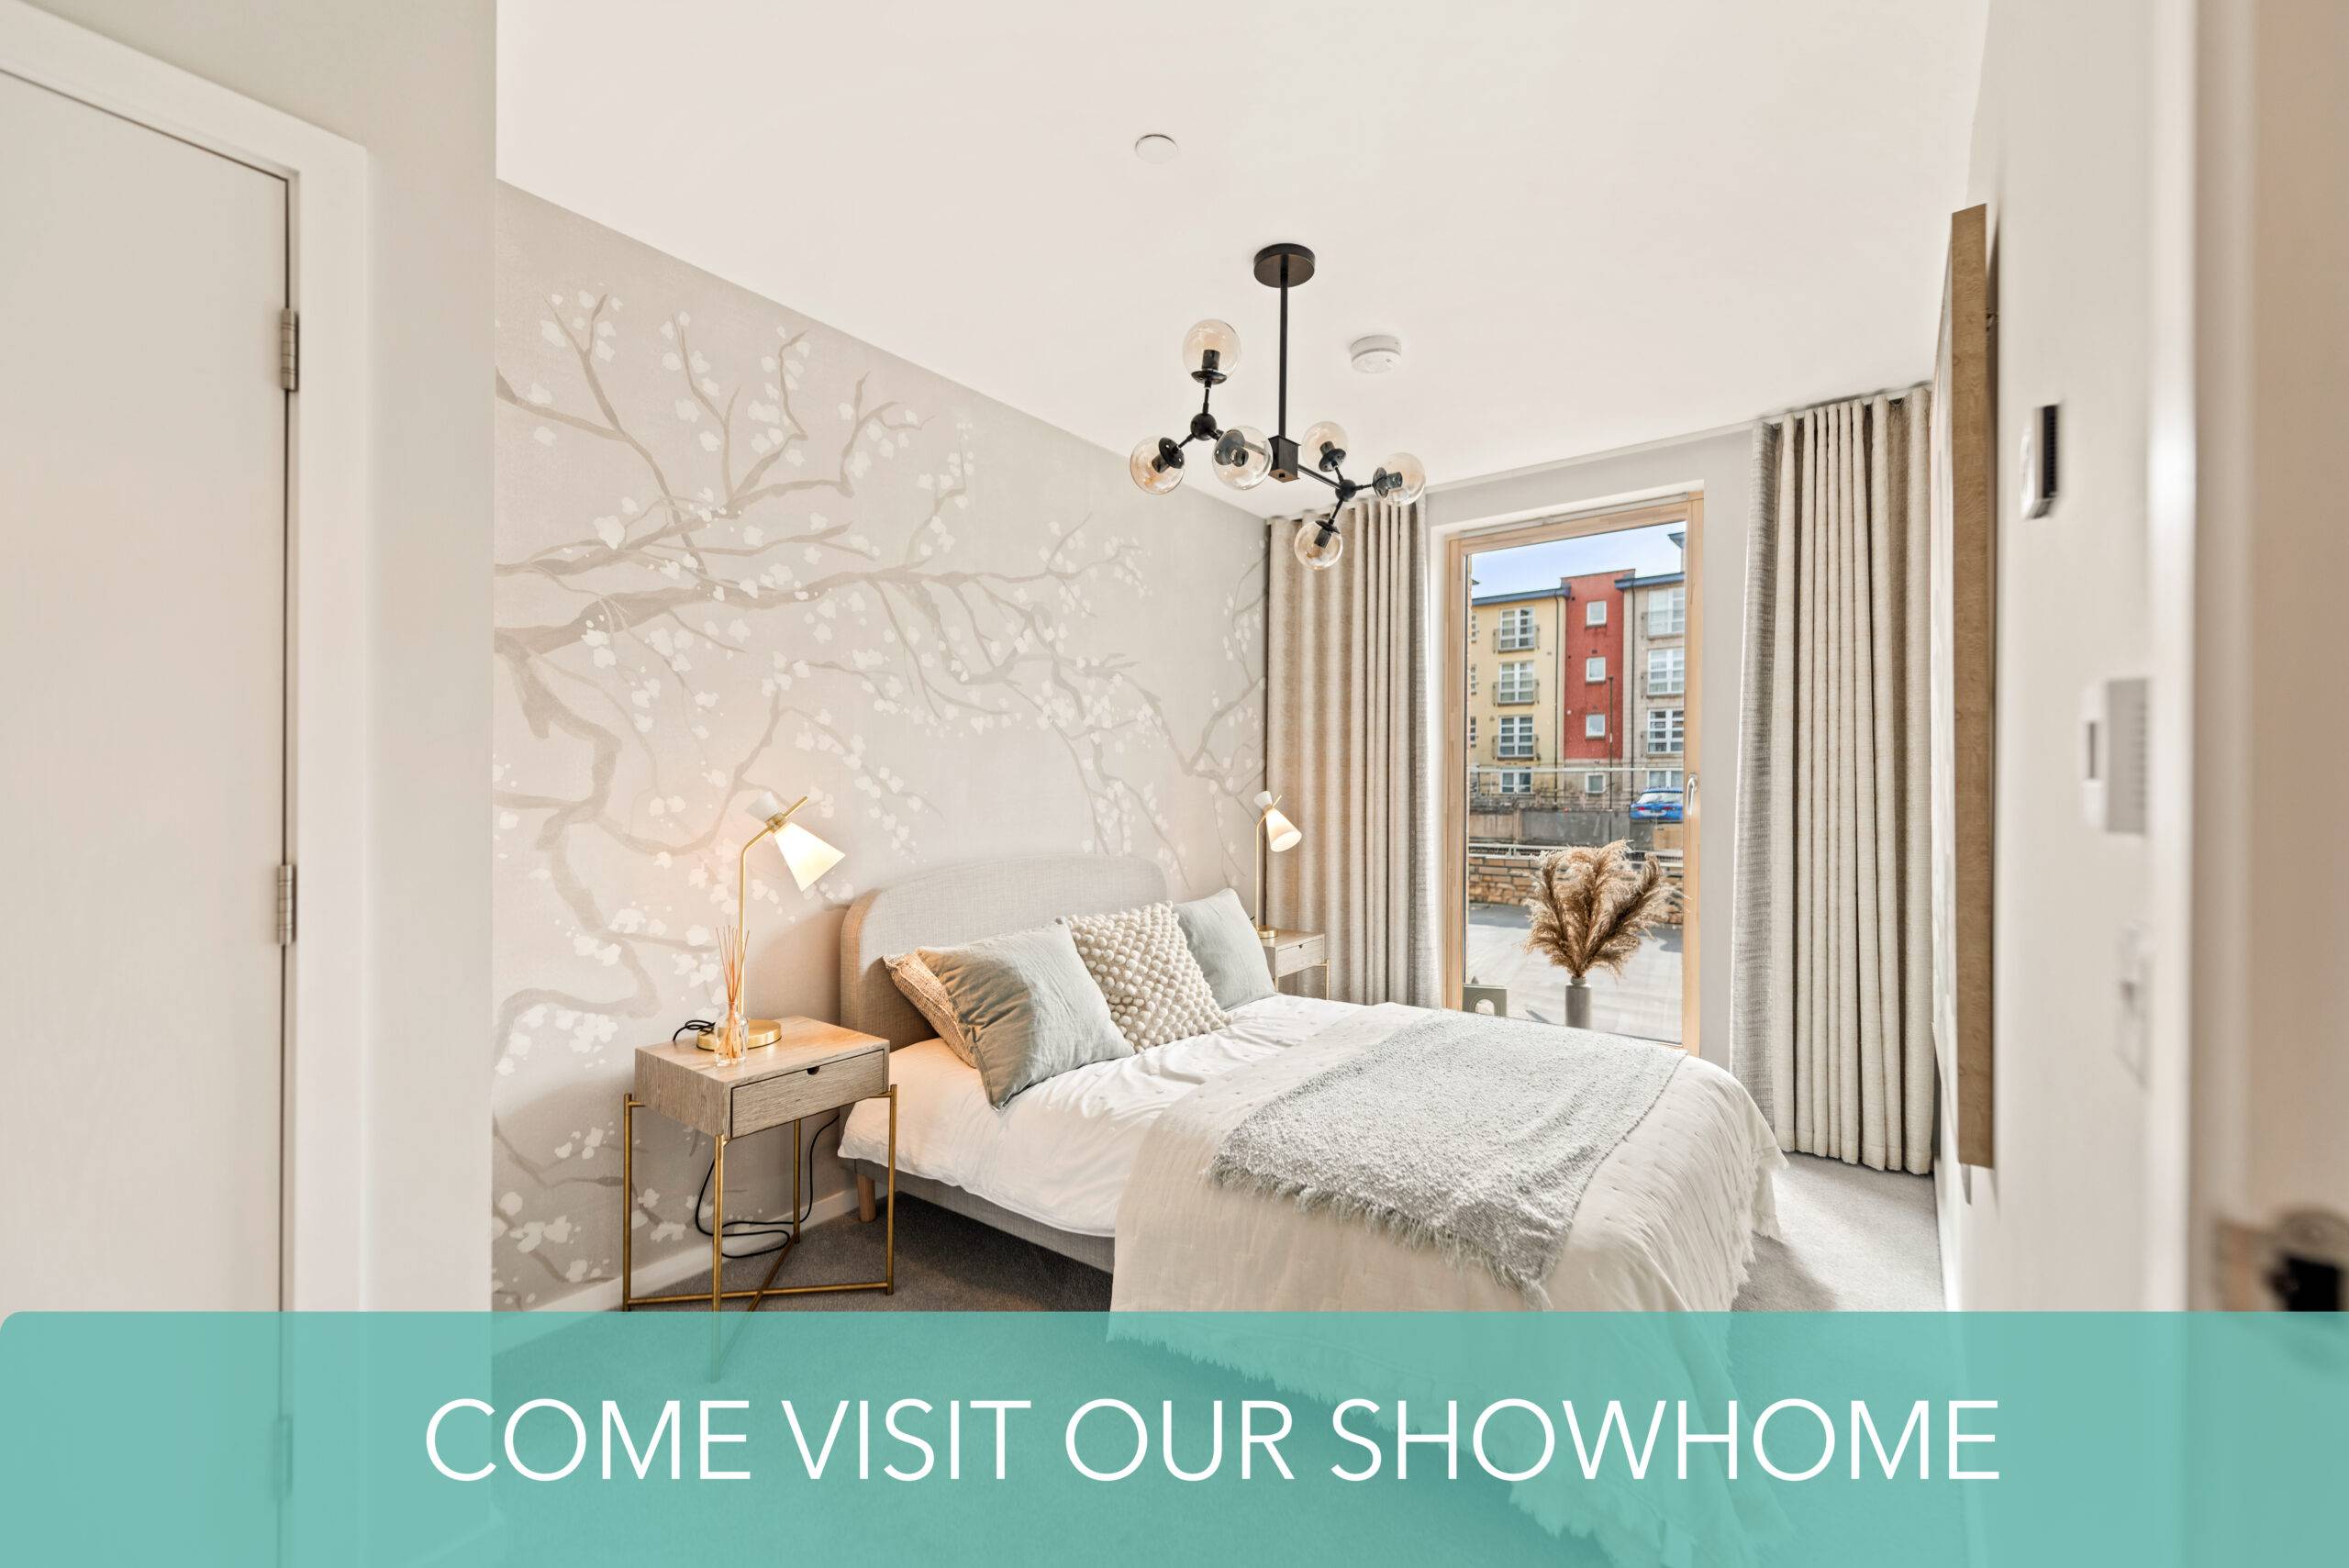 VISIT OUR SHOWHOME 4